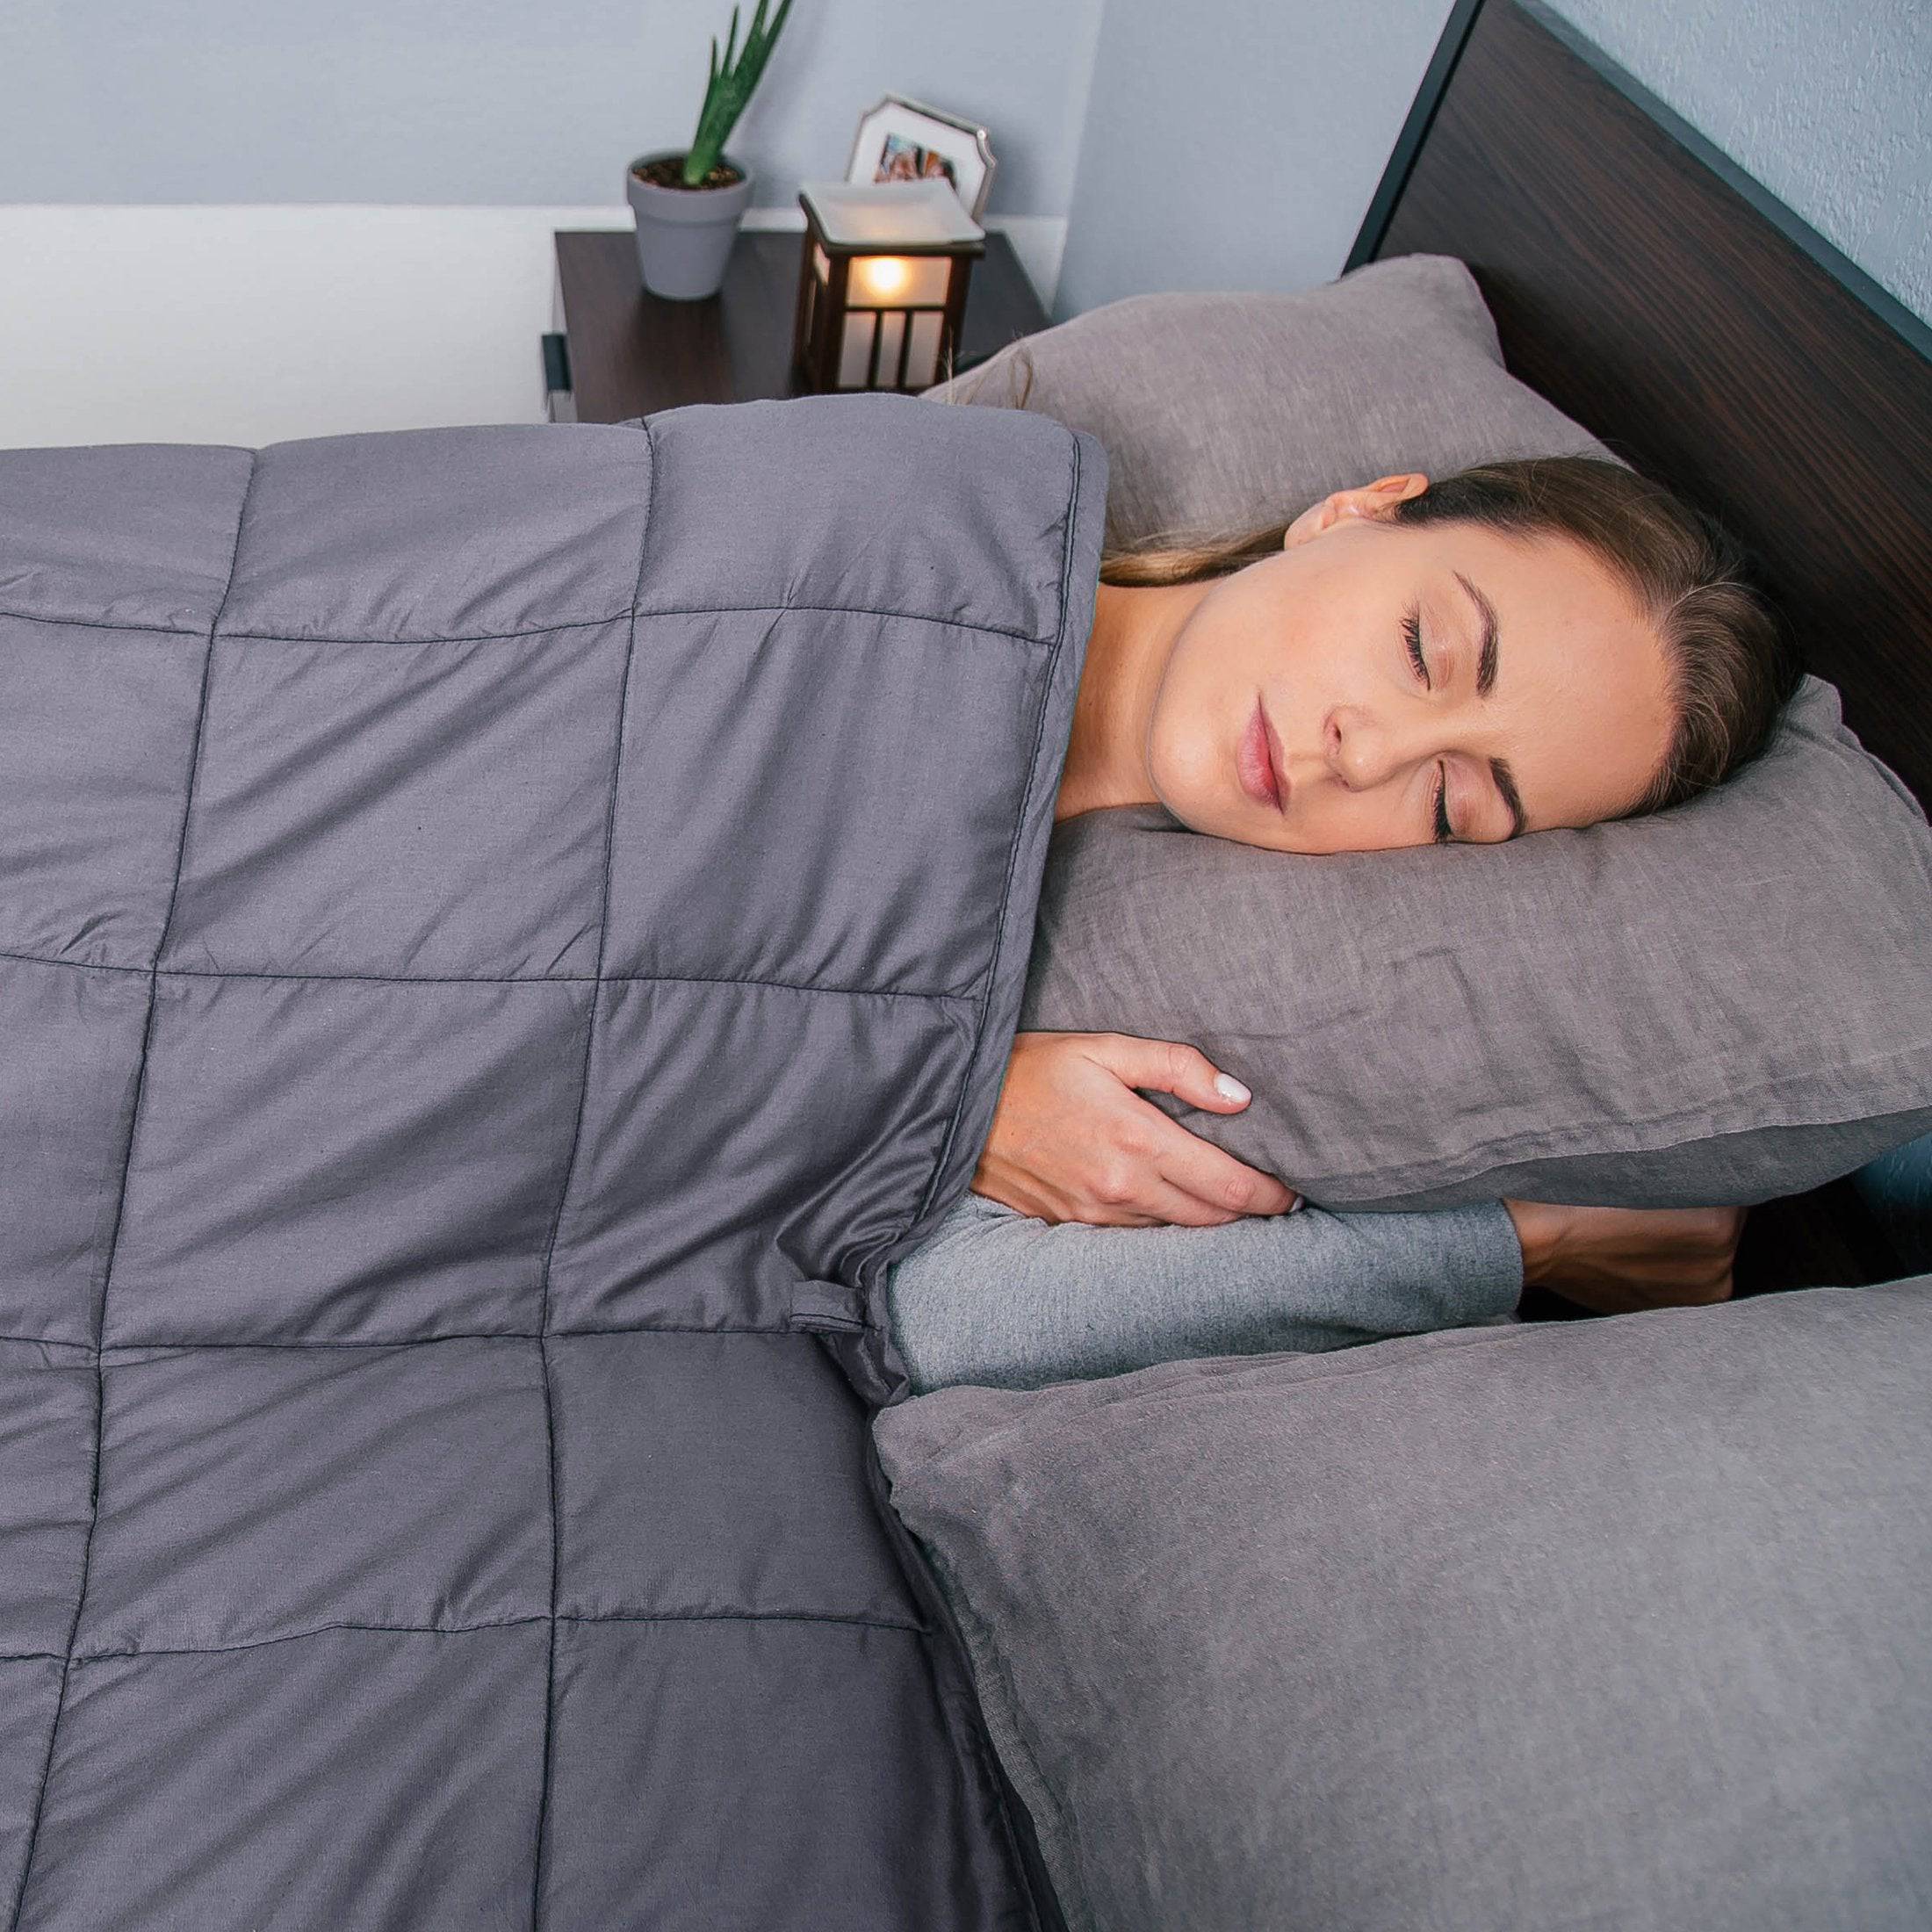 Bed Buddy Weighted Blanket - Adult and Kid Sized - Carex Health Brands